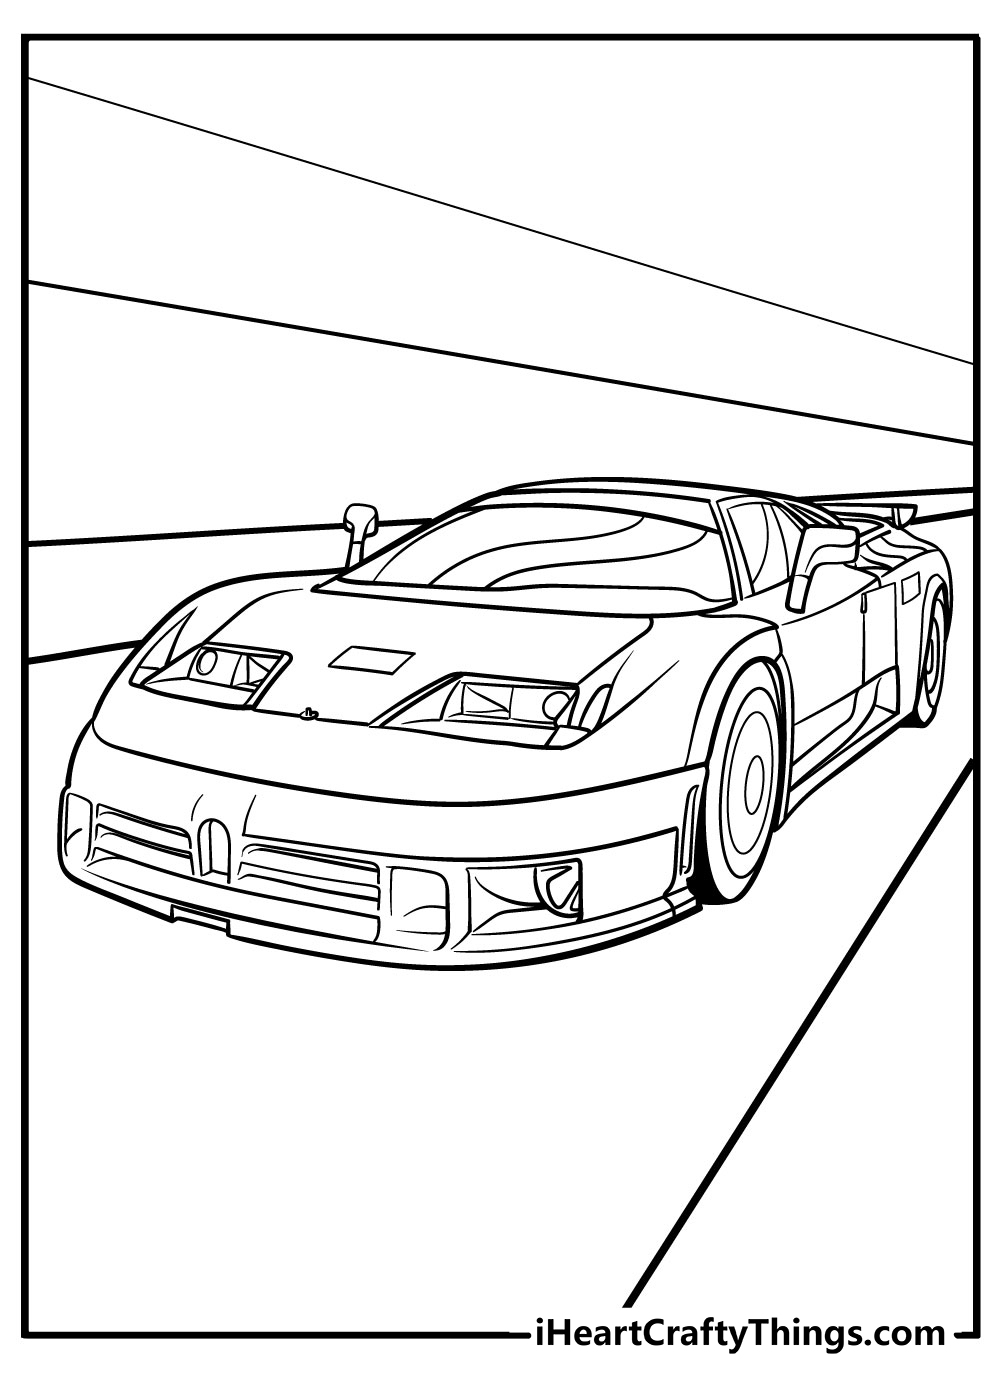 Printable Super Cars Coloring Pages Updated 20